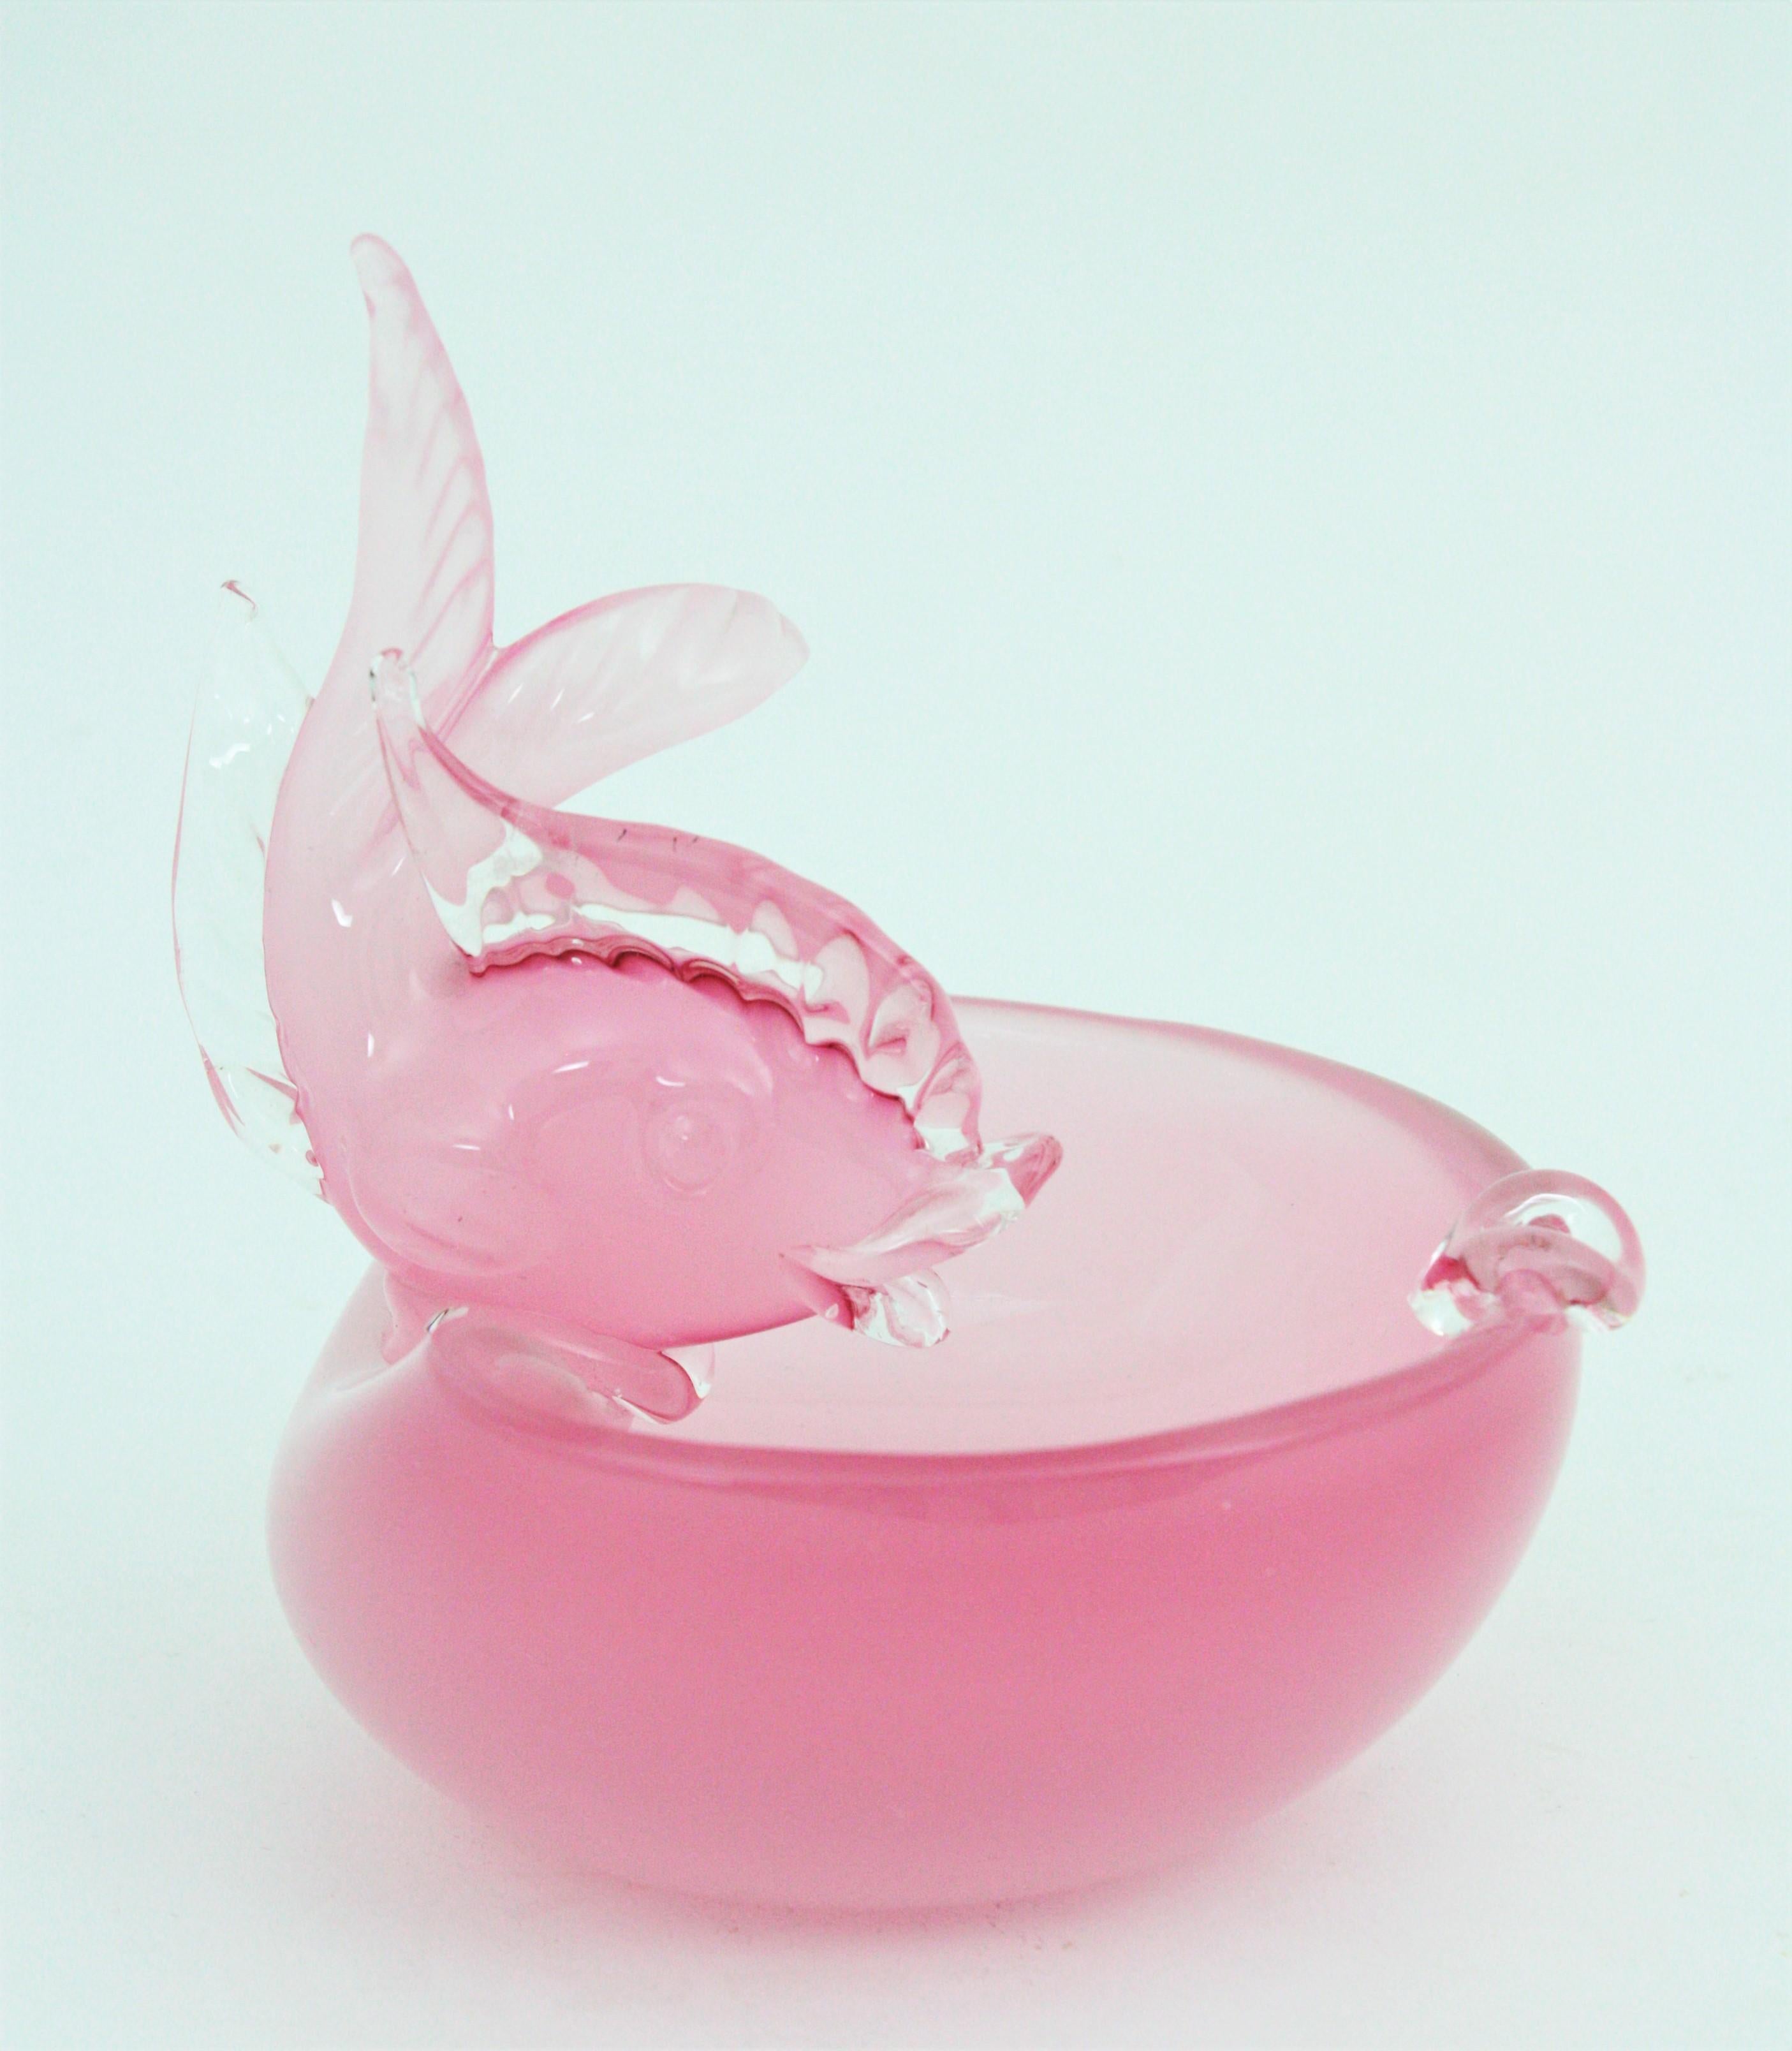 Archimede Seguso Murano Opal Pink Alabastro Fish Bowl or Ashtray, Italy, 1950s For Sale 1